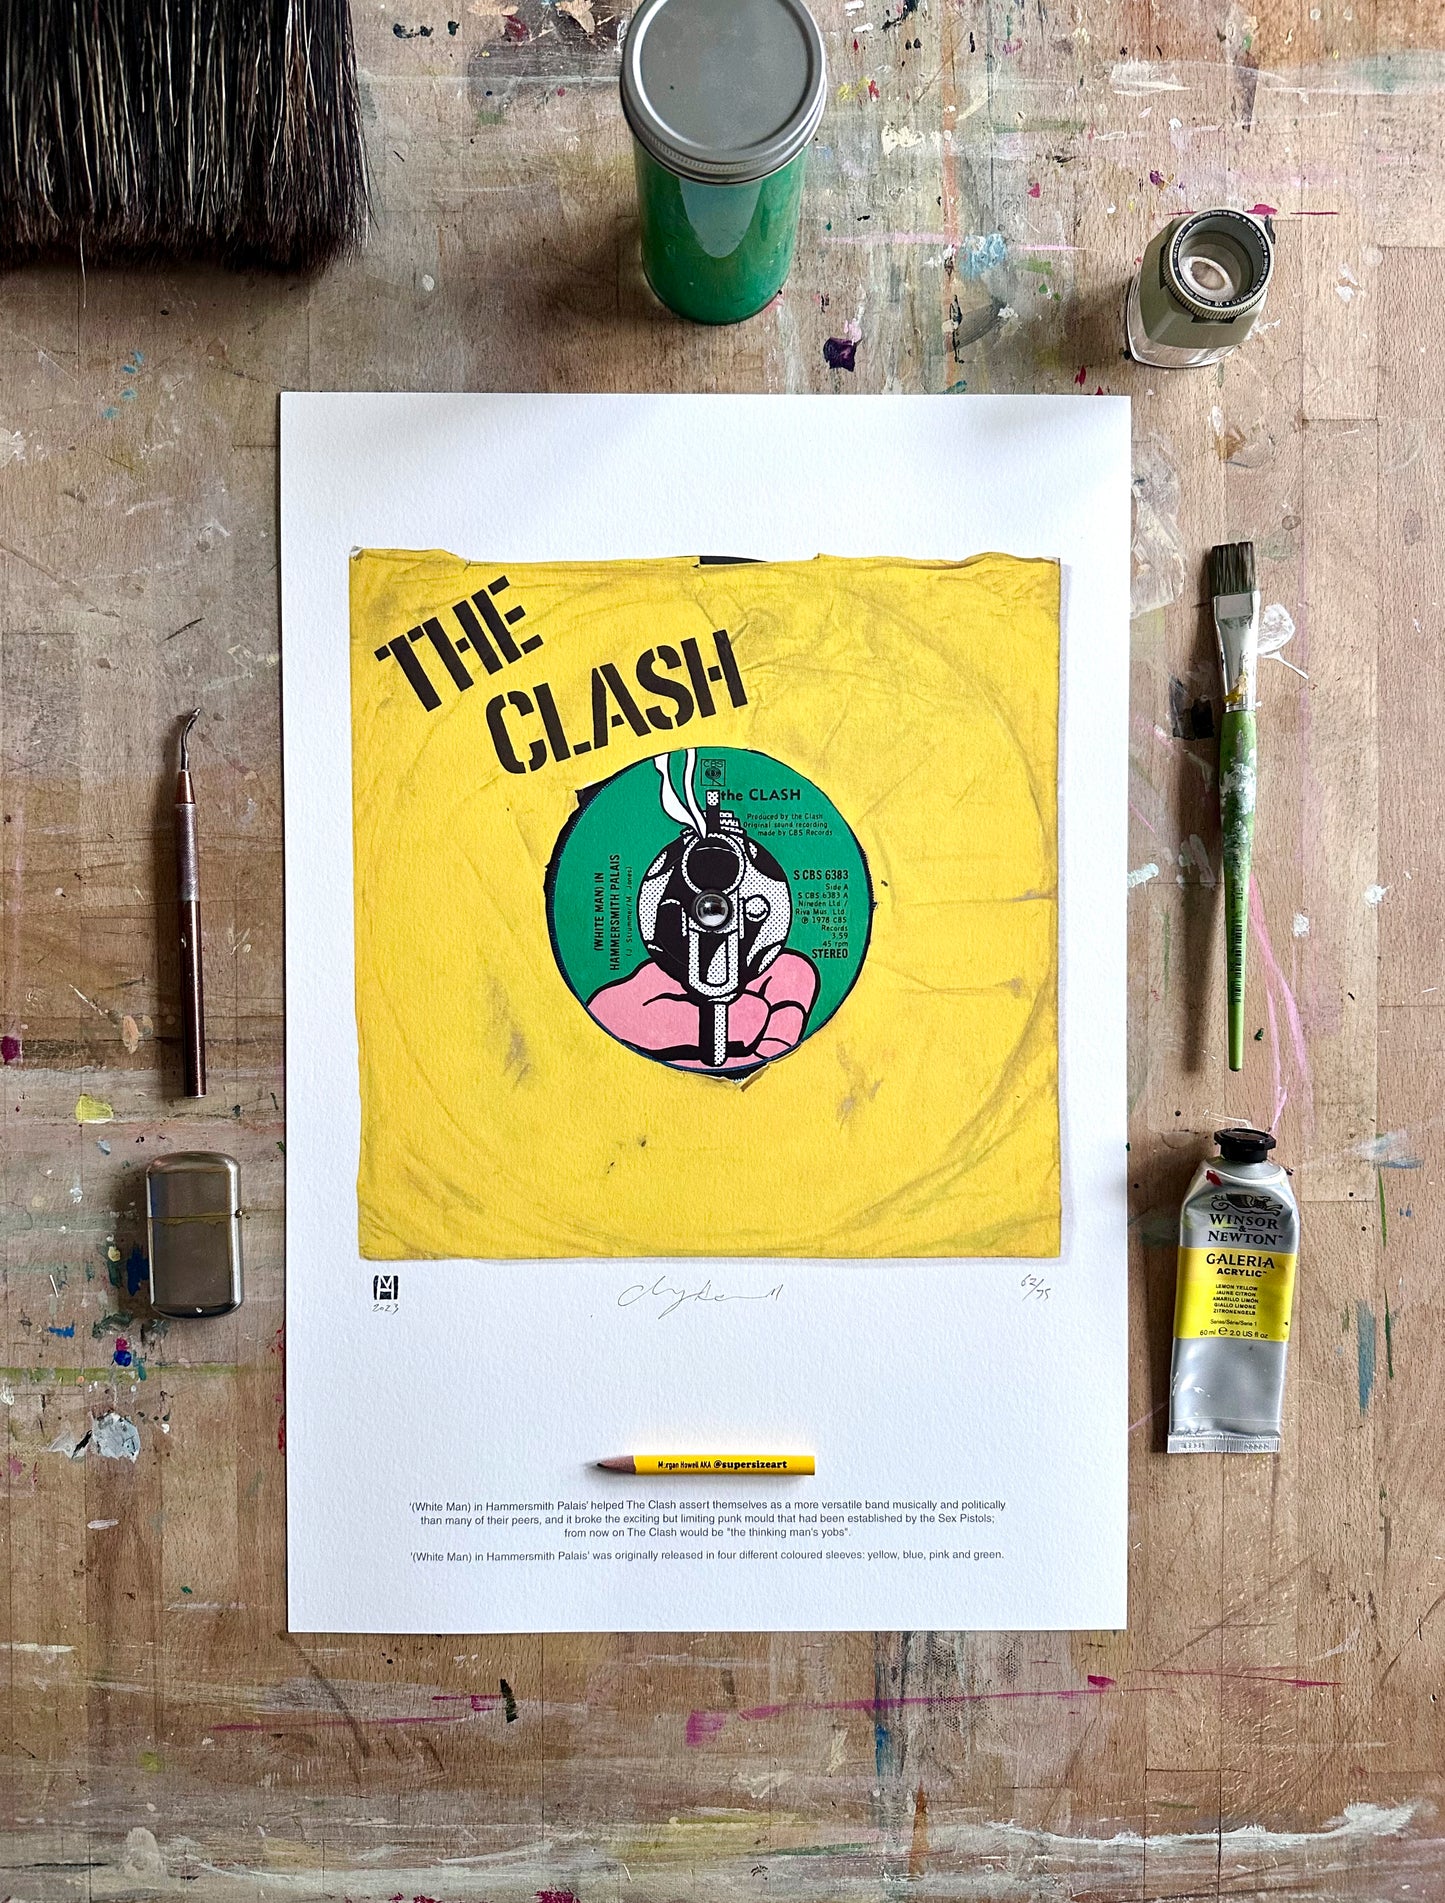 White Man in Hammersmith Palais'' The Clash Limited Edition Prints of Original Painting